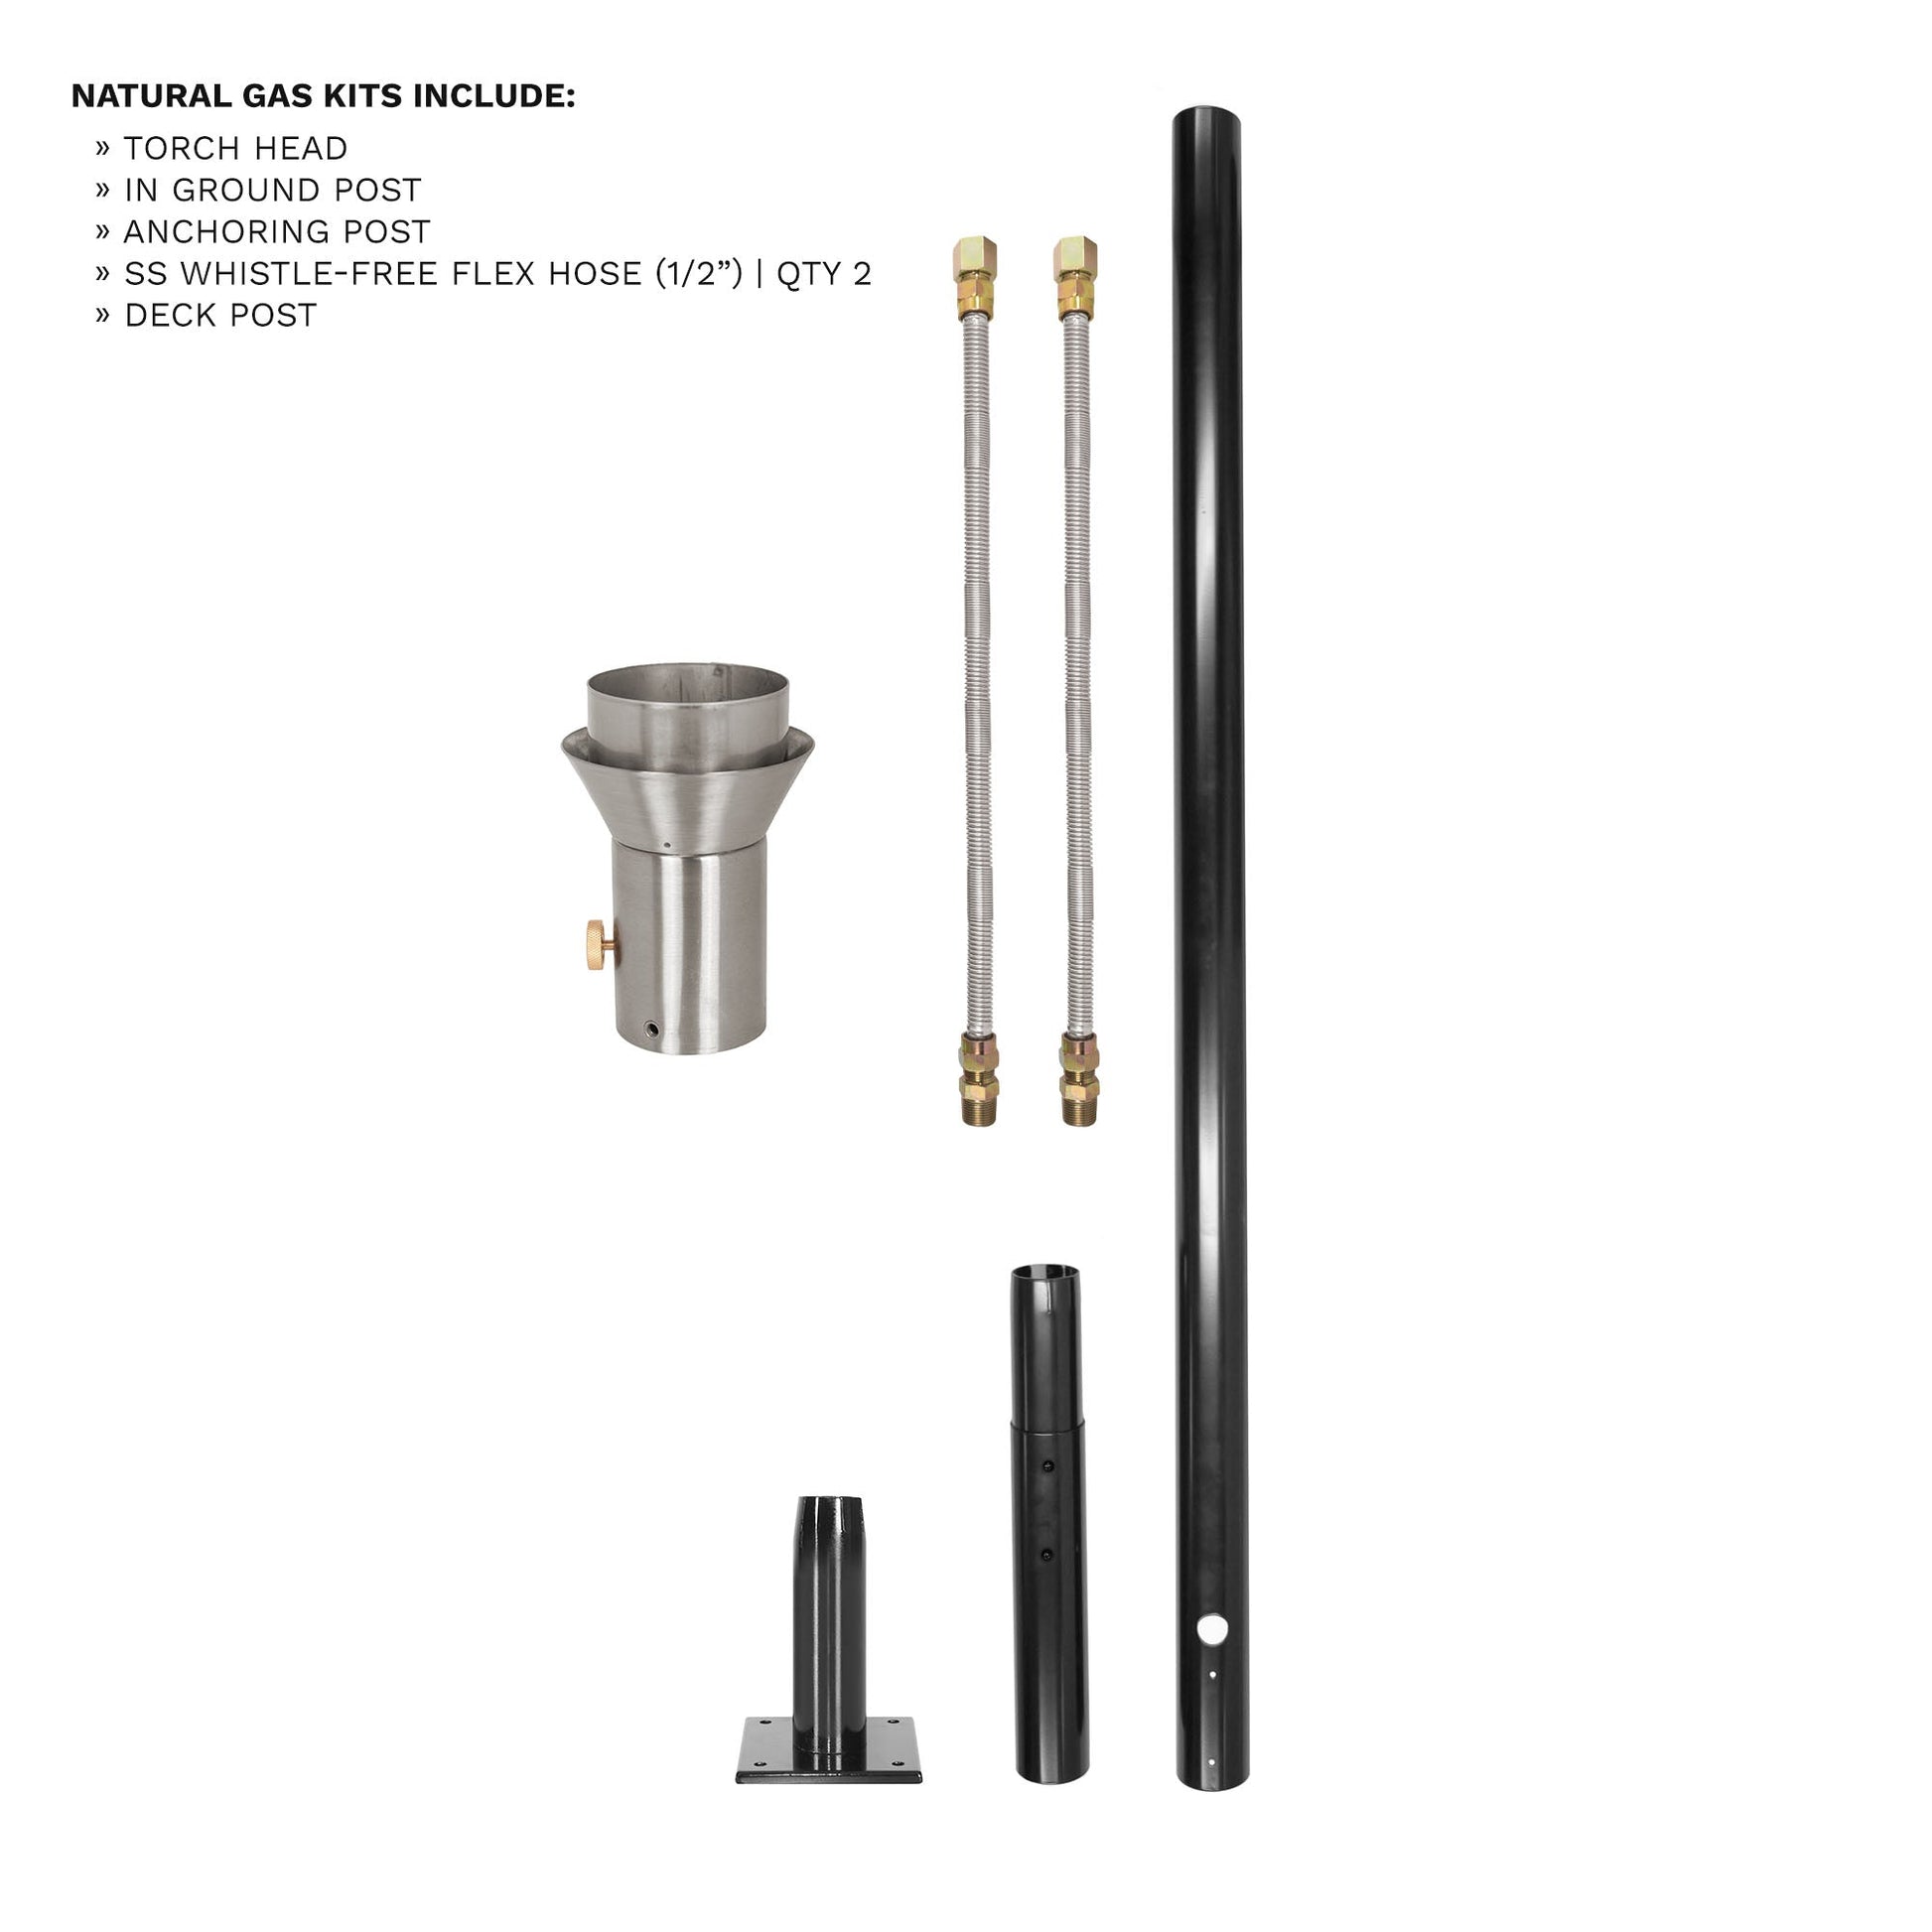 Spiral Original TOP Torch & Post Complete Kit - Stainless Steel - Natural Gas-Novel Home